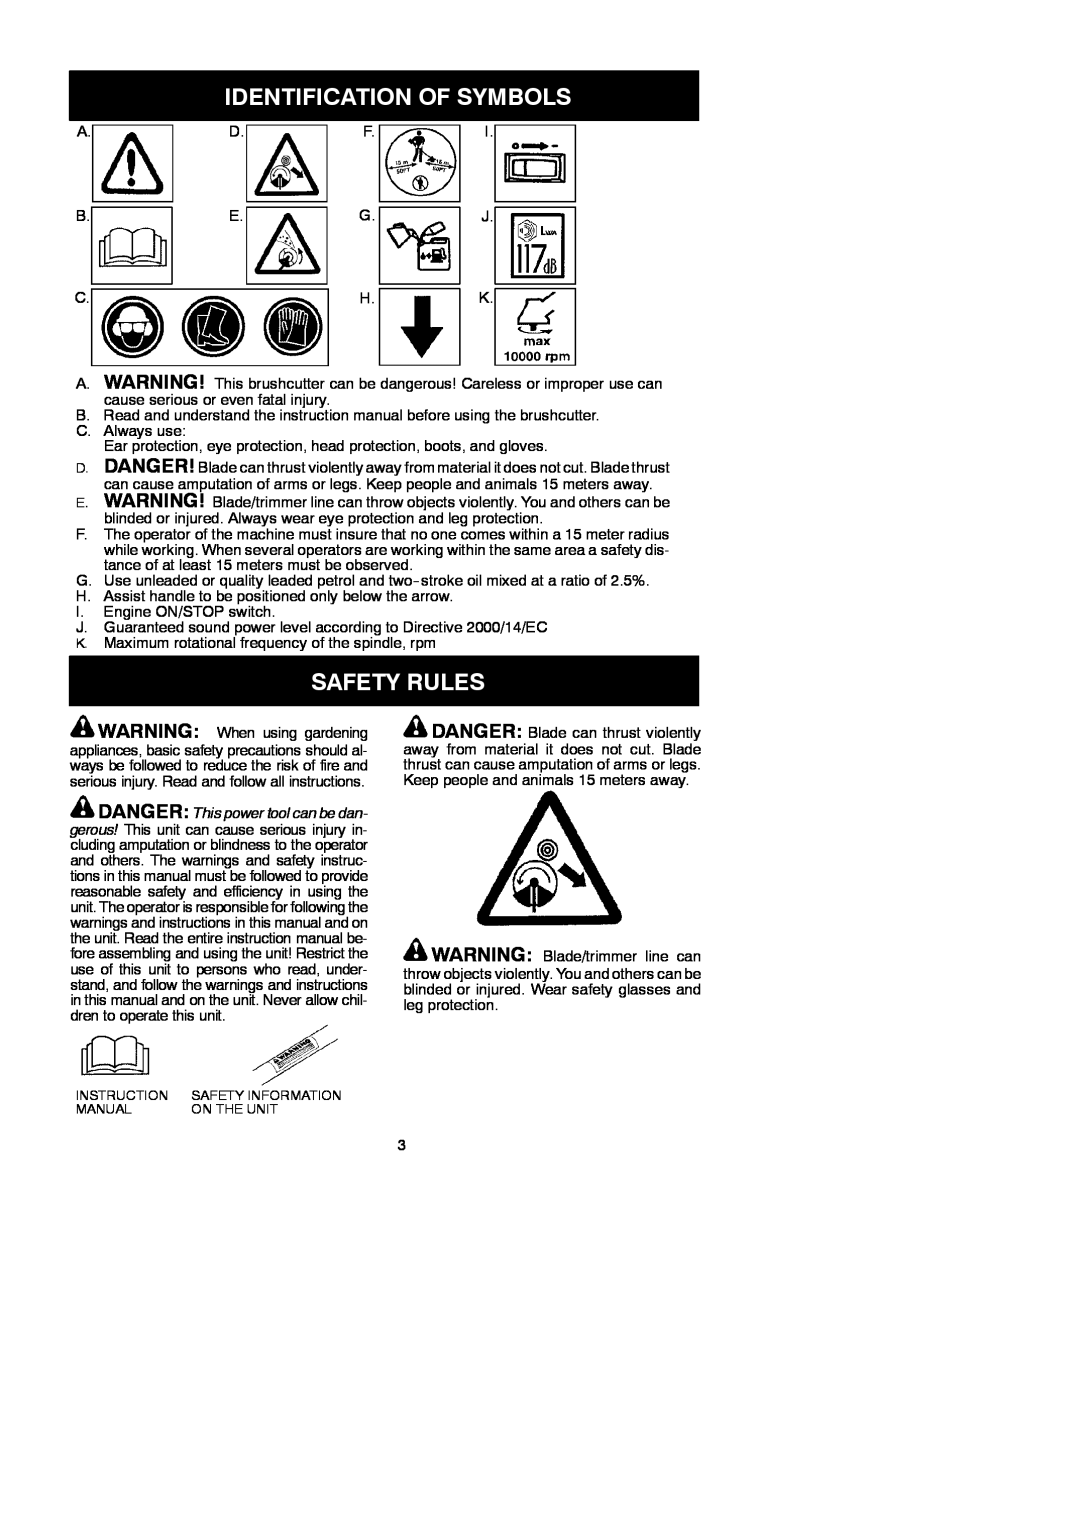 McCulloch 952715745, 433L, 115306026 Identification Of Symbols, Safety Rules, DANGER This power tool can be dan 